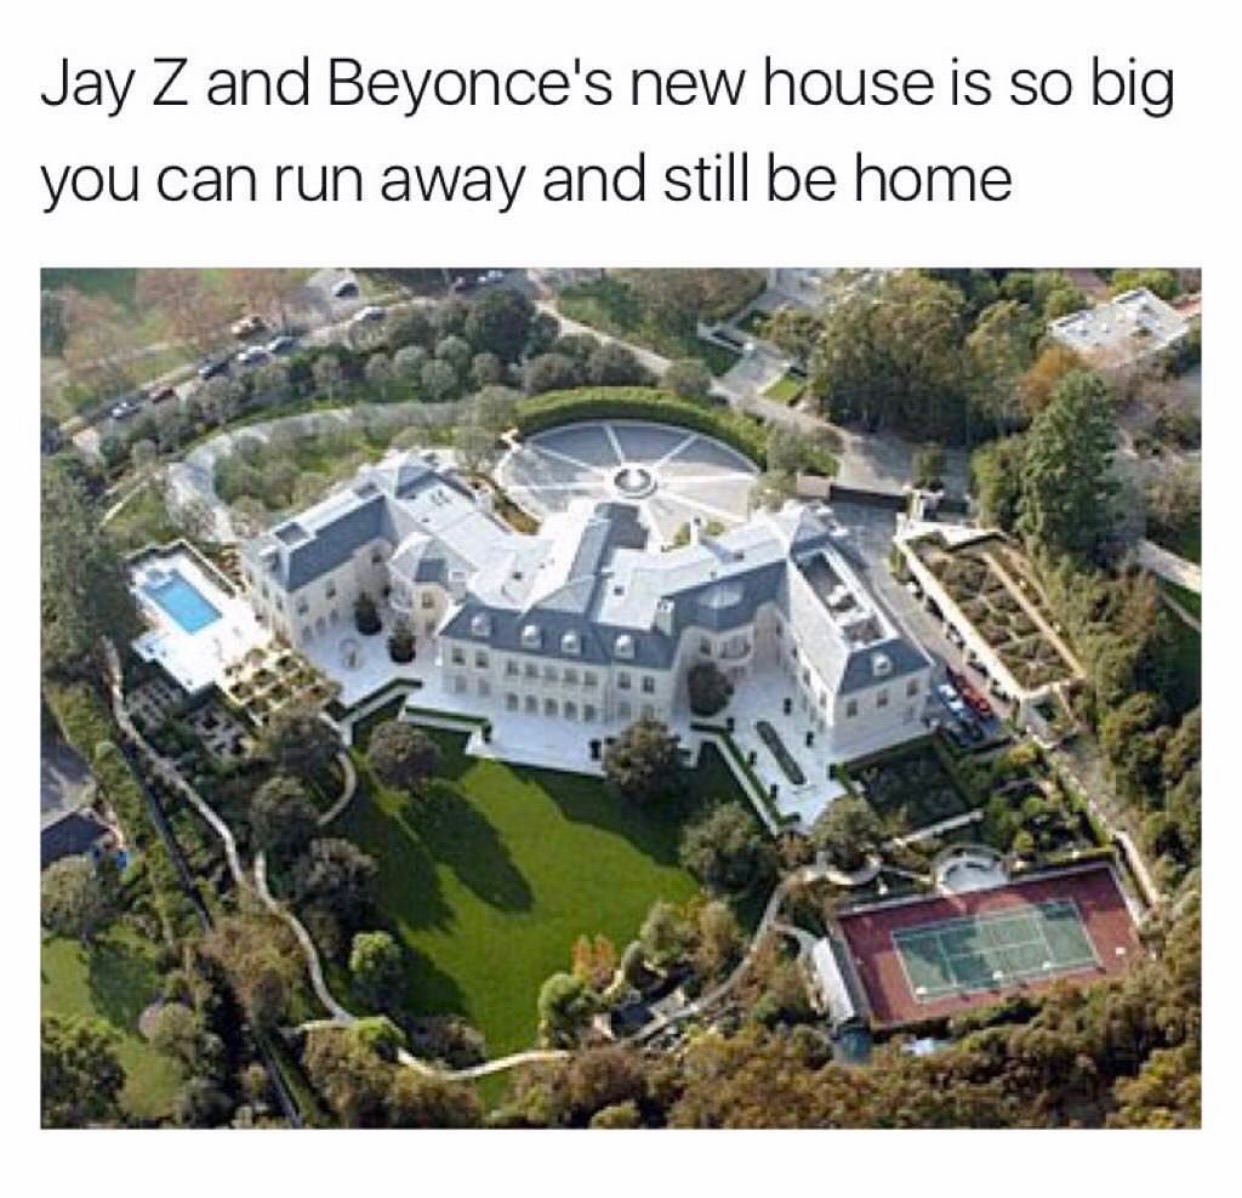 most expensive homes in la - Jay Z and Beyonce's new house is so big you can run away and still be home